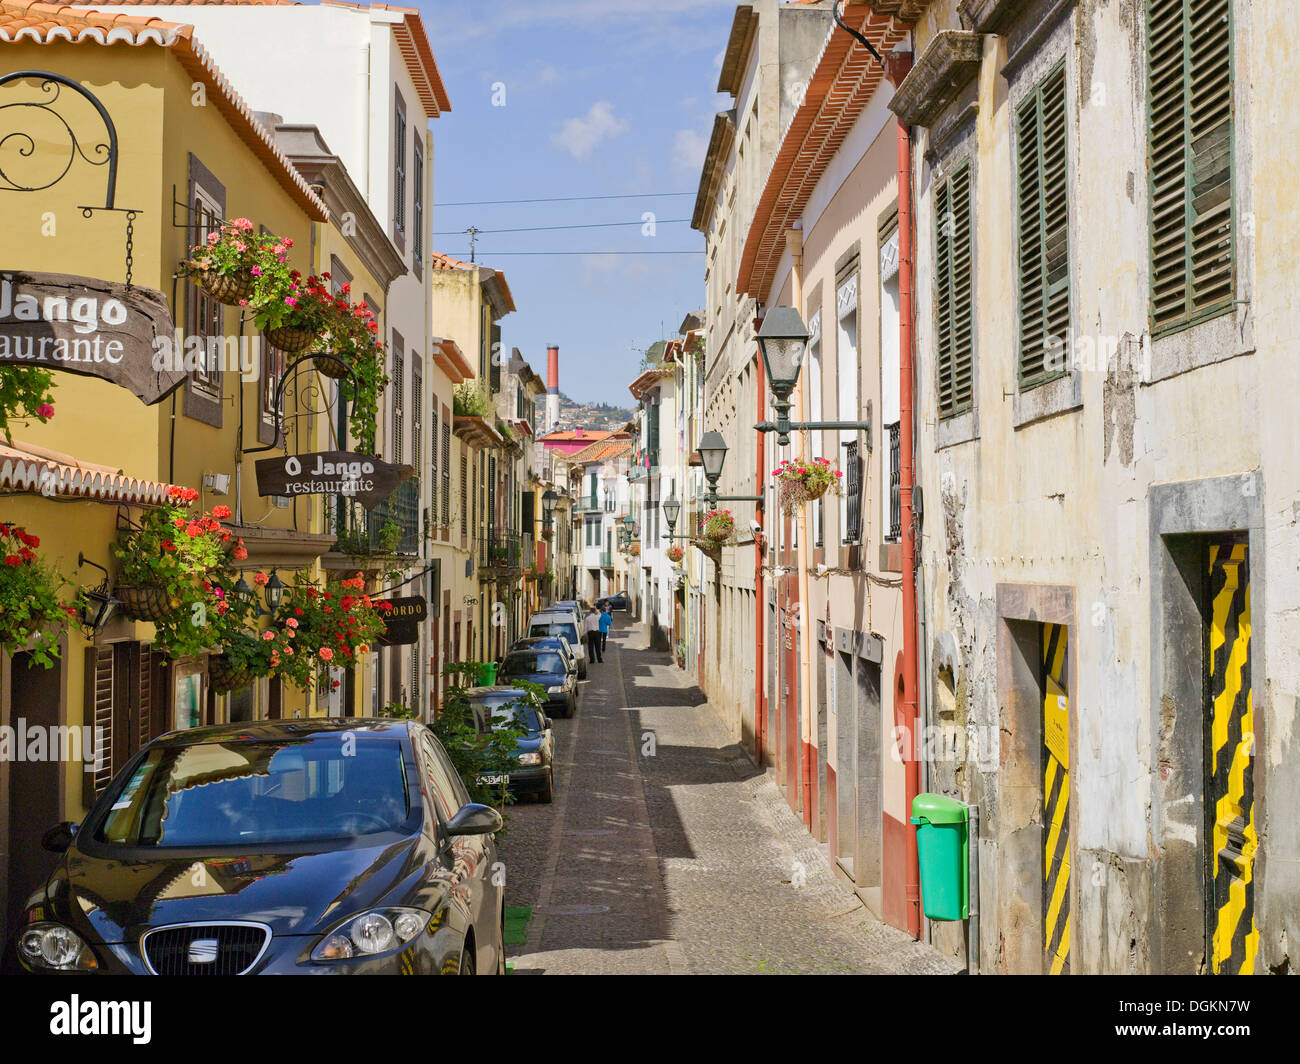 Looking down a street in the Old Town. Stock Photo